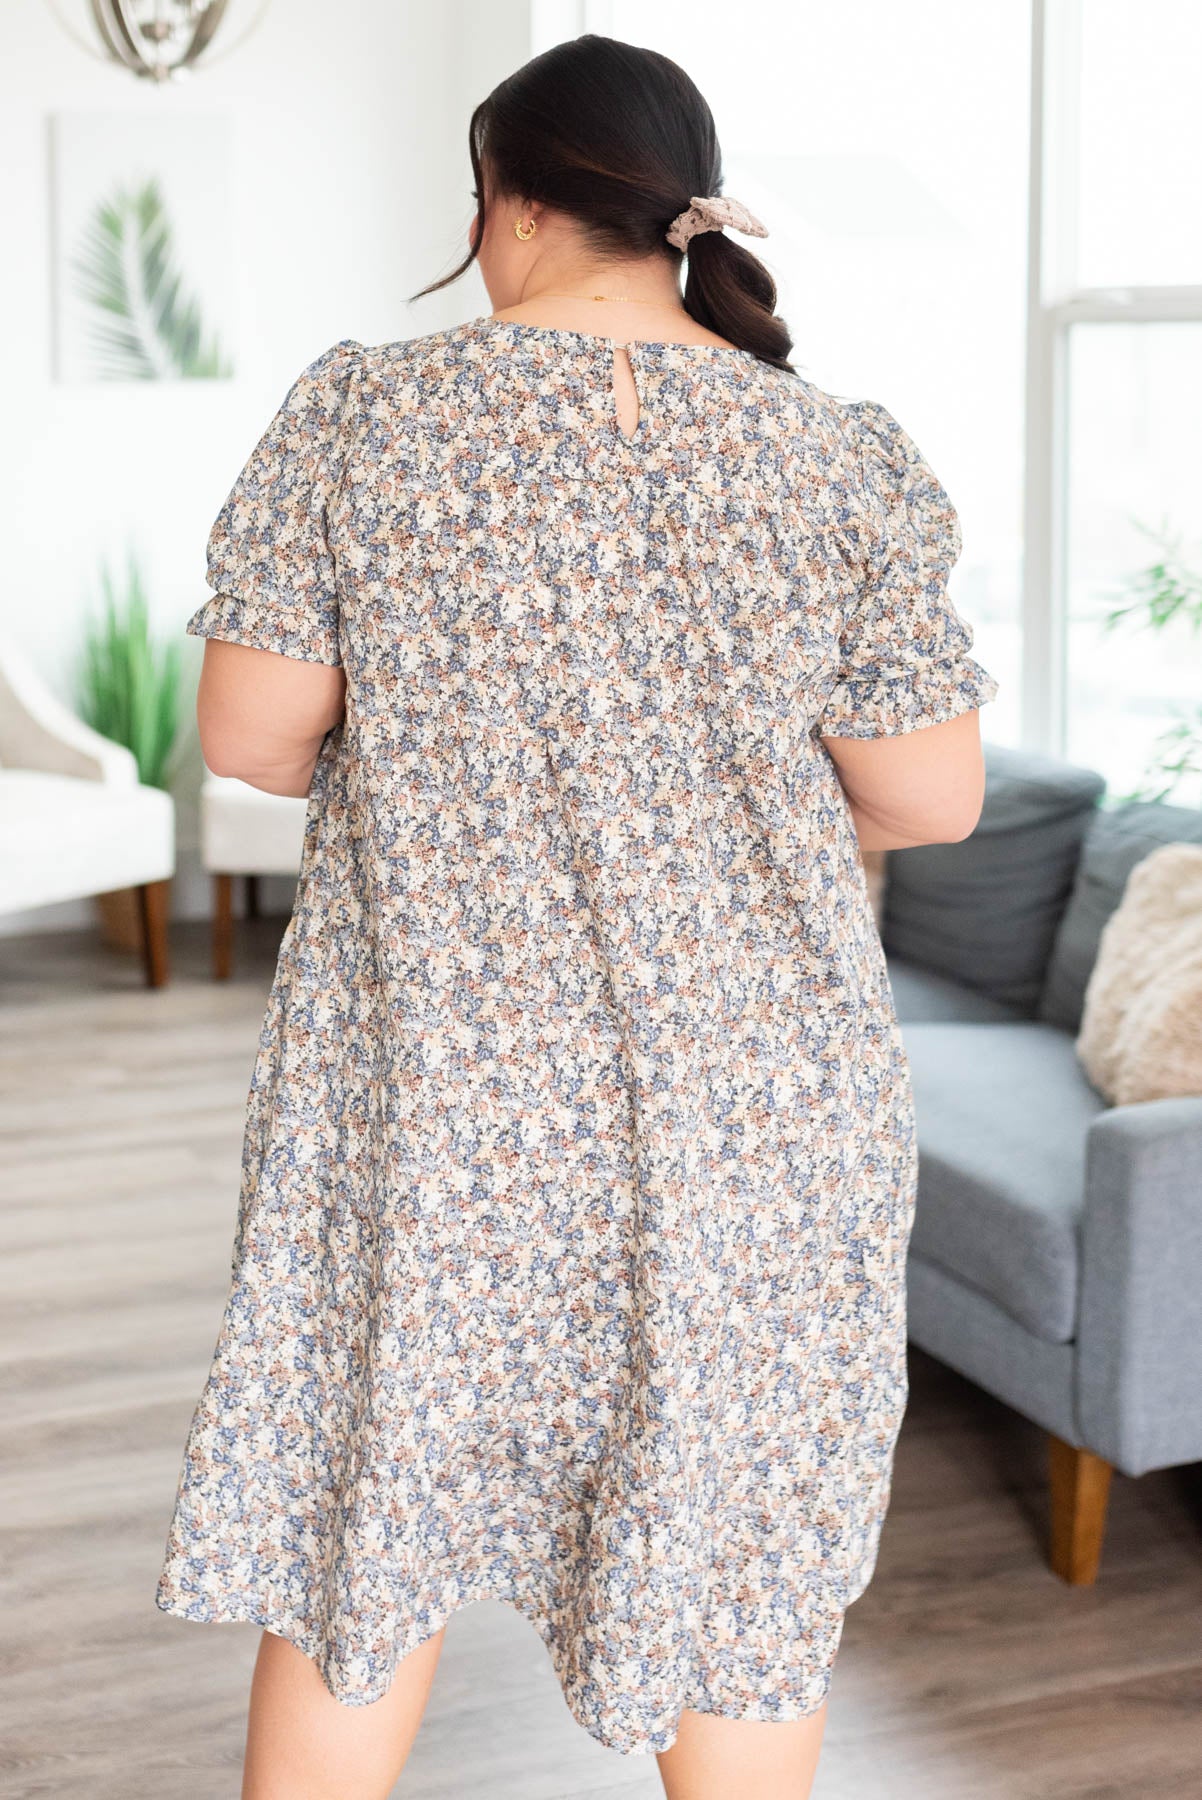 Back view of the plus size blue floral dress